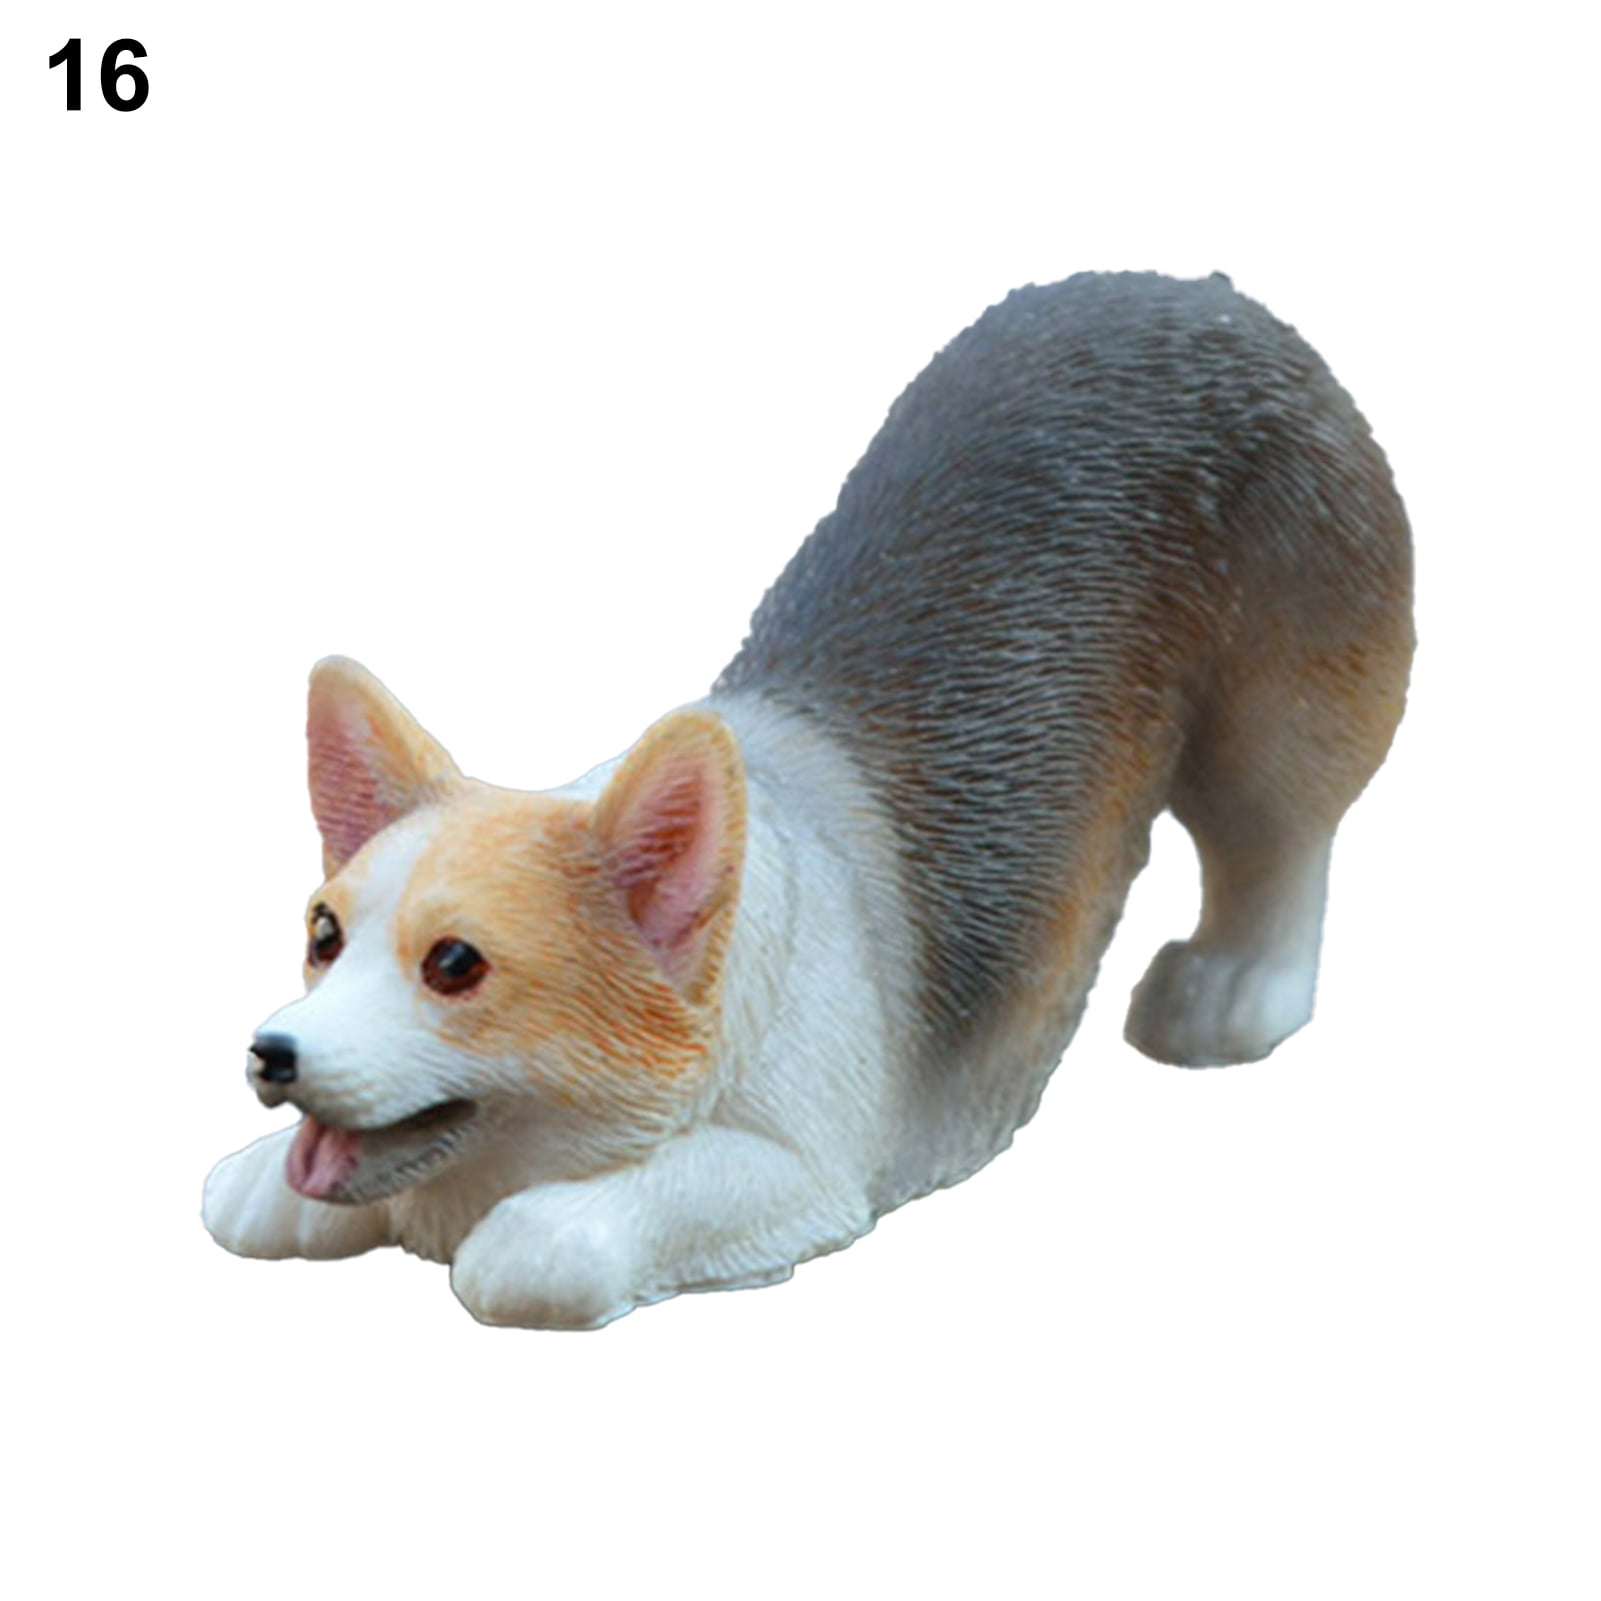 Best Dog Toys For Corgis- Tailormade For Corgis - Get Your Pet Certified